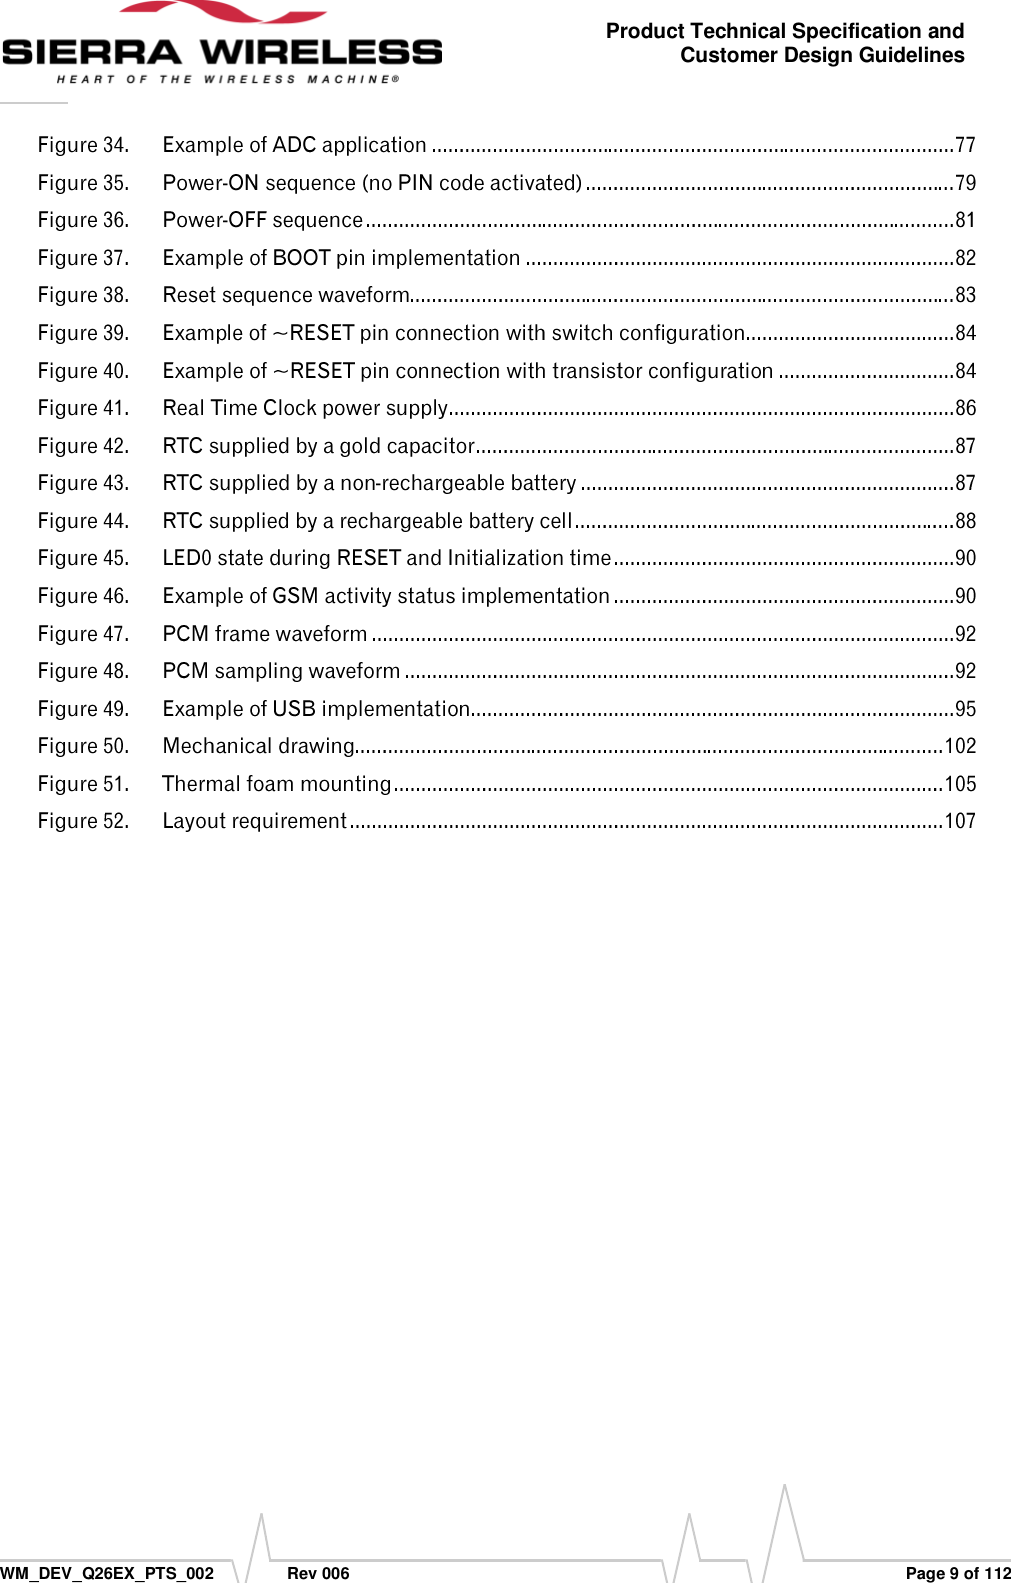      WM_DEV_Q26EX_PTS_002  Rev 006  Page 9 of 112 Product Technical Specification and Customer Design Guidelines                                                          